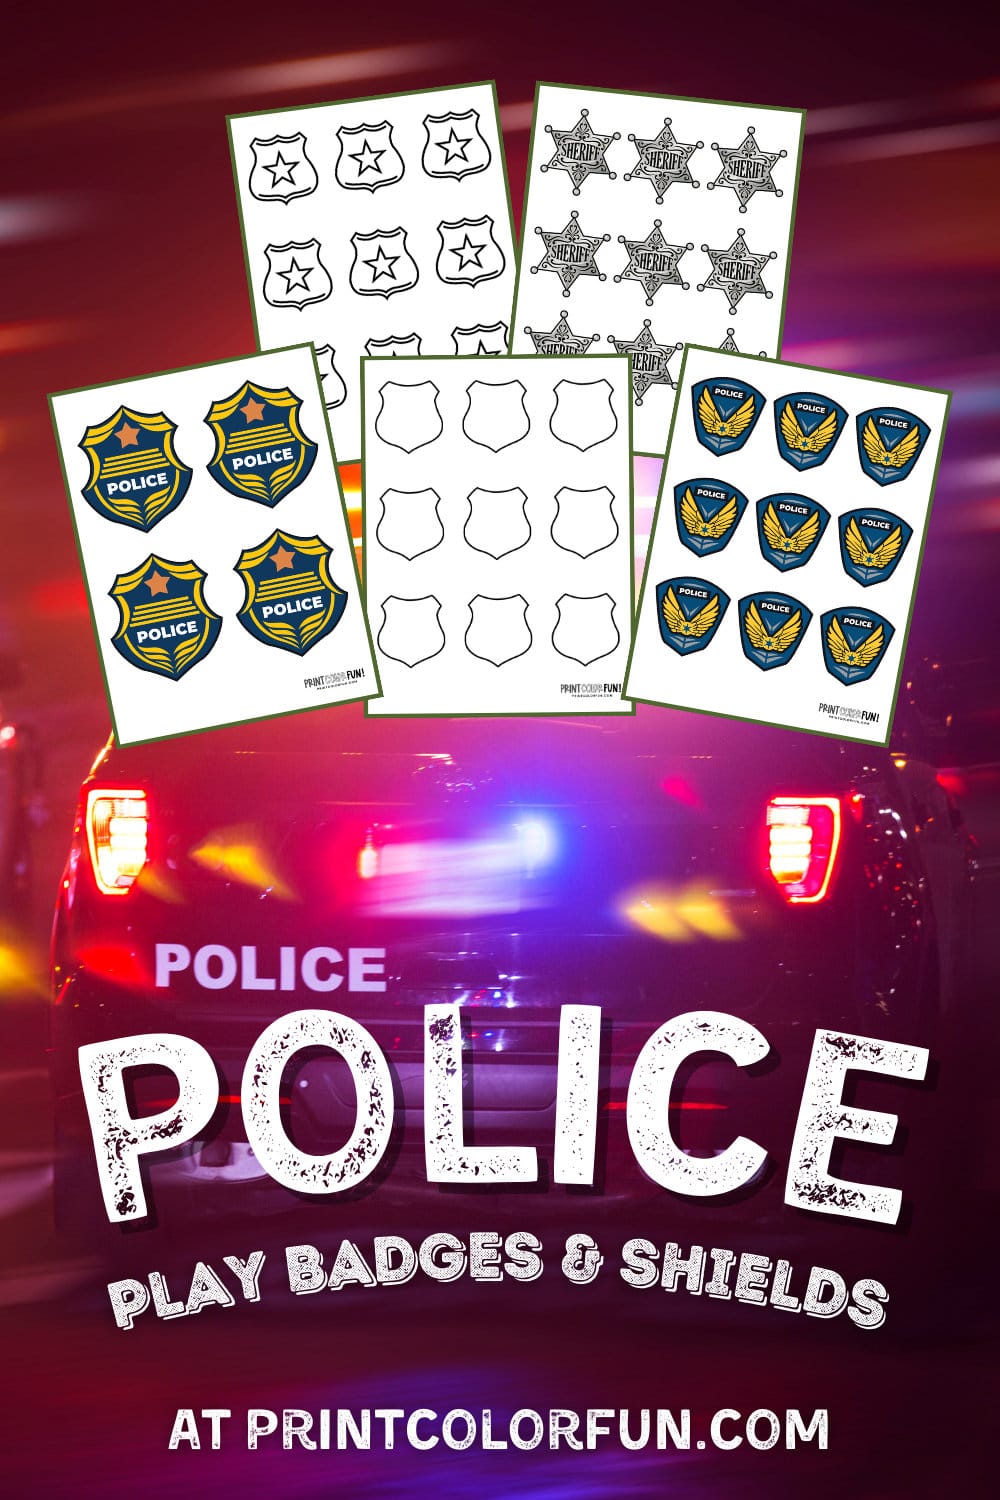 Sheriff and police badge clipart and coloring pages from PrintColorFun com